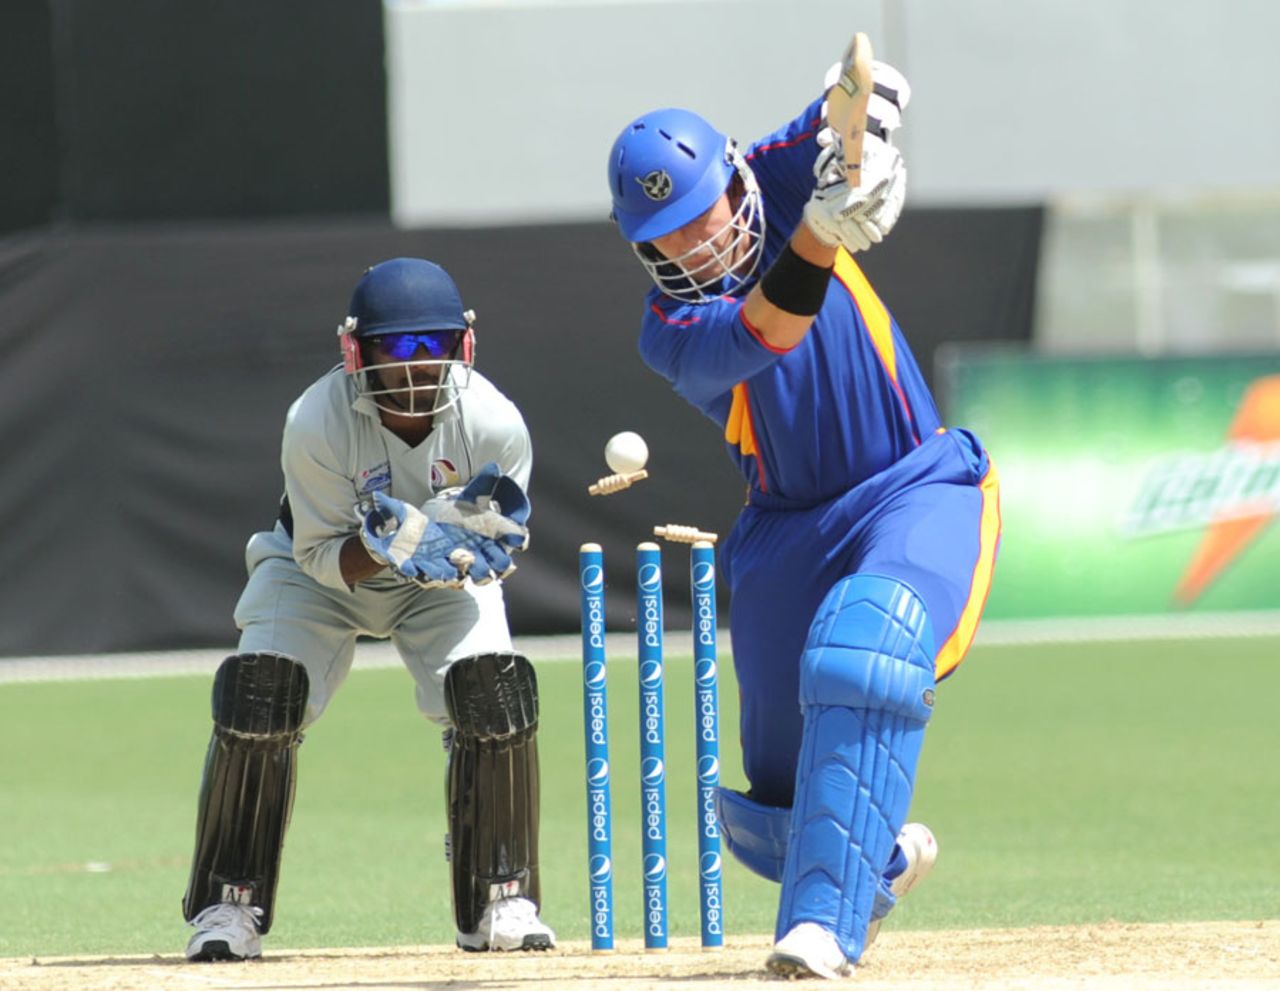 Sarel Burger of Namibia is bowled cheaply in a ICC World Cricket League Division Two match, UAE v Namibia, Dubai, April 8, 2011